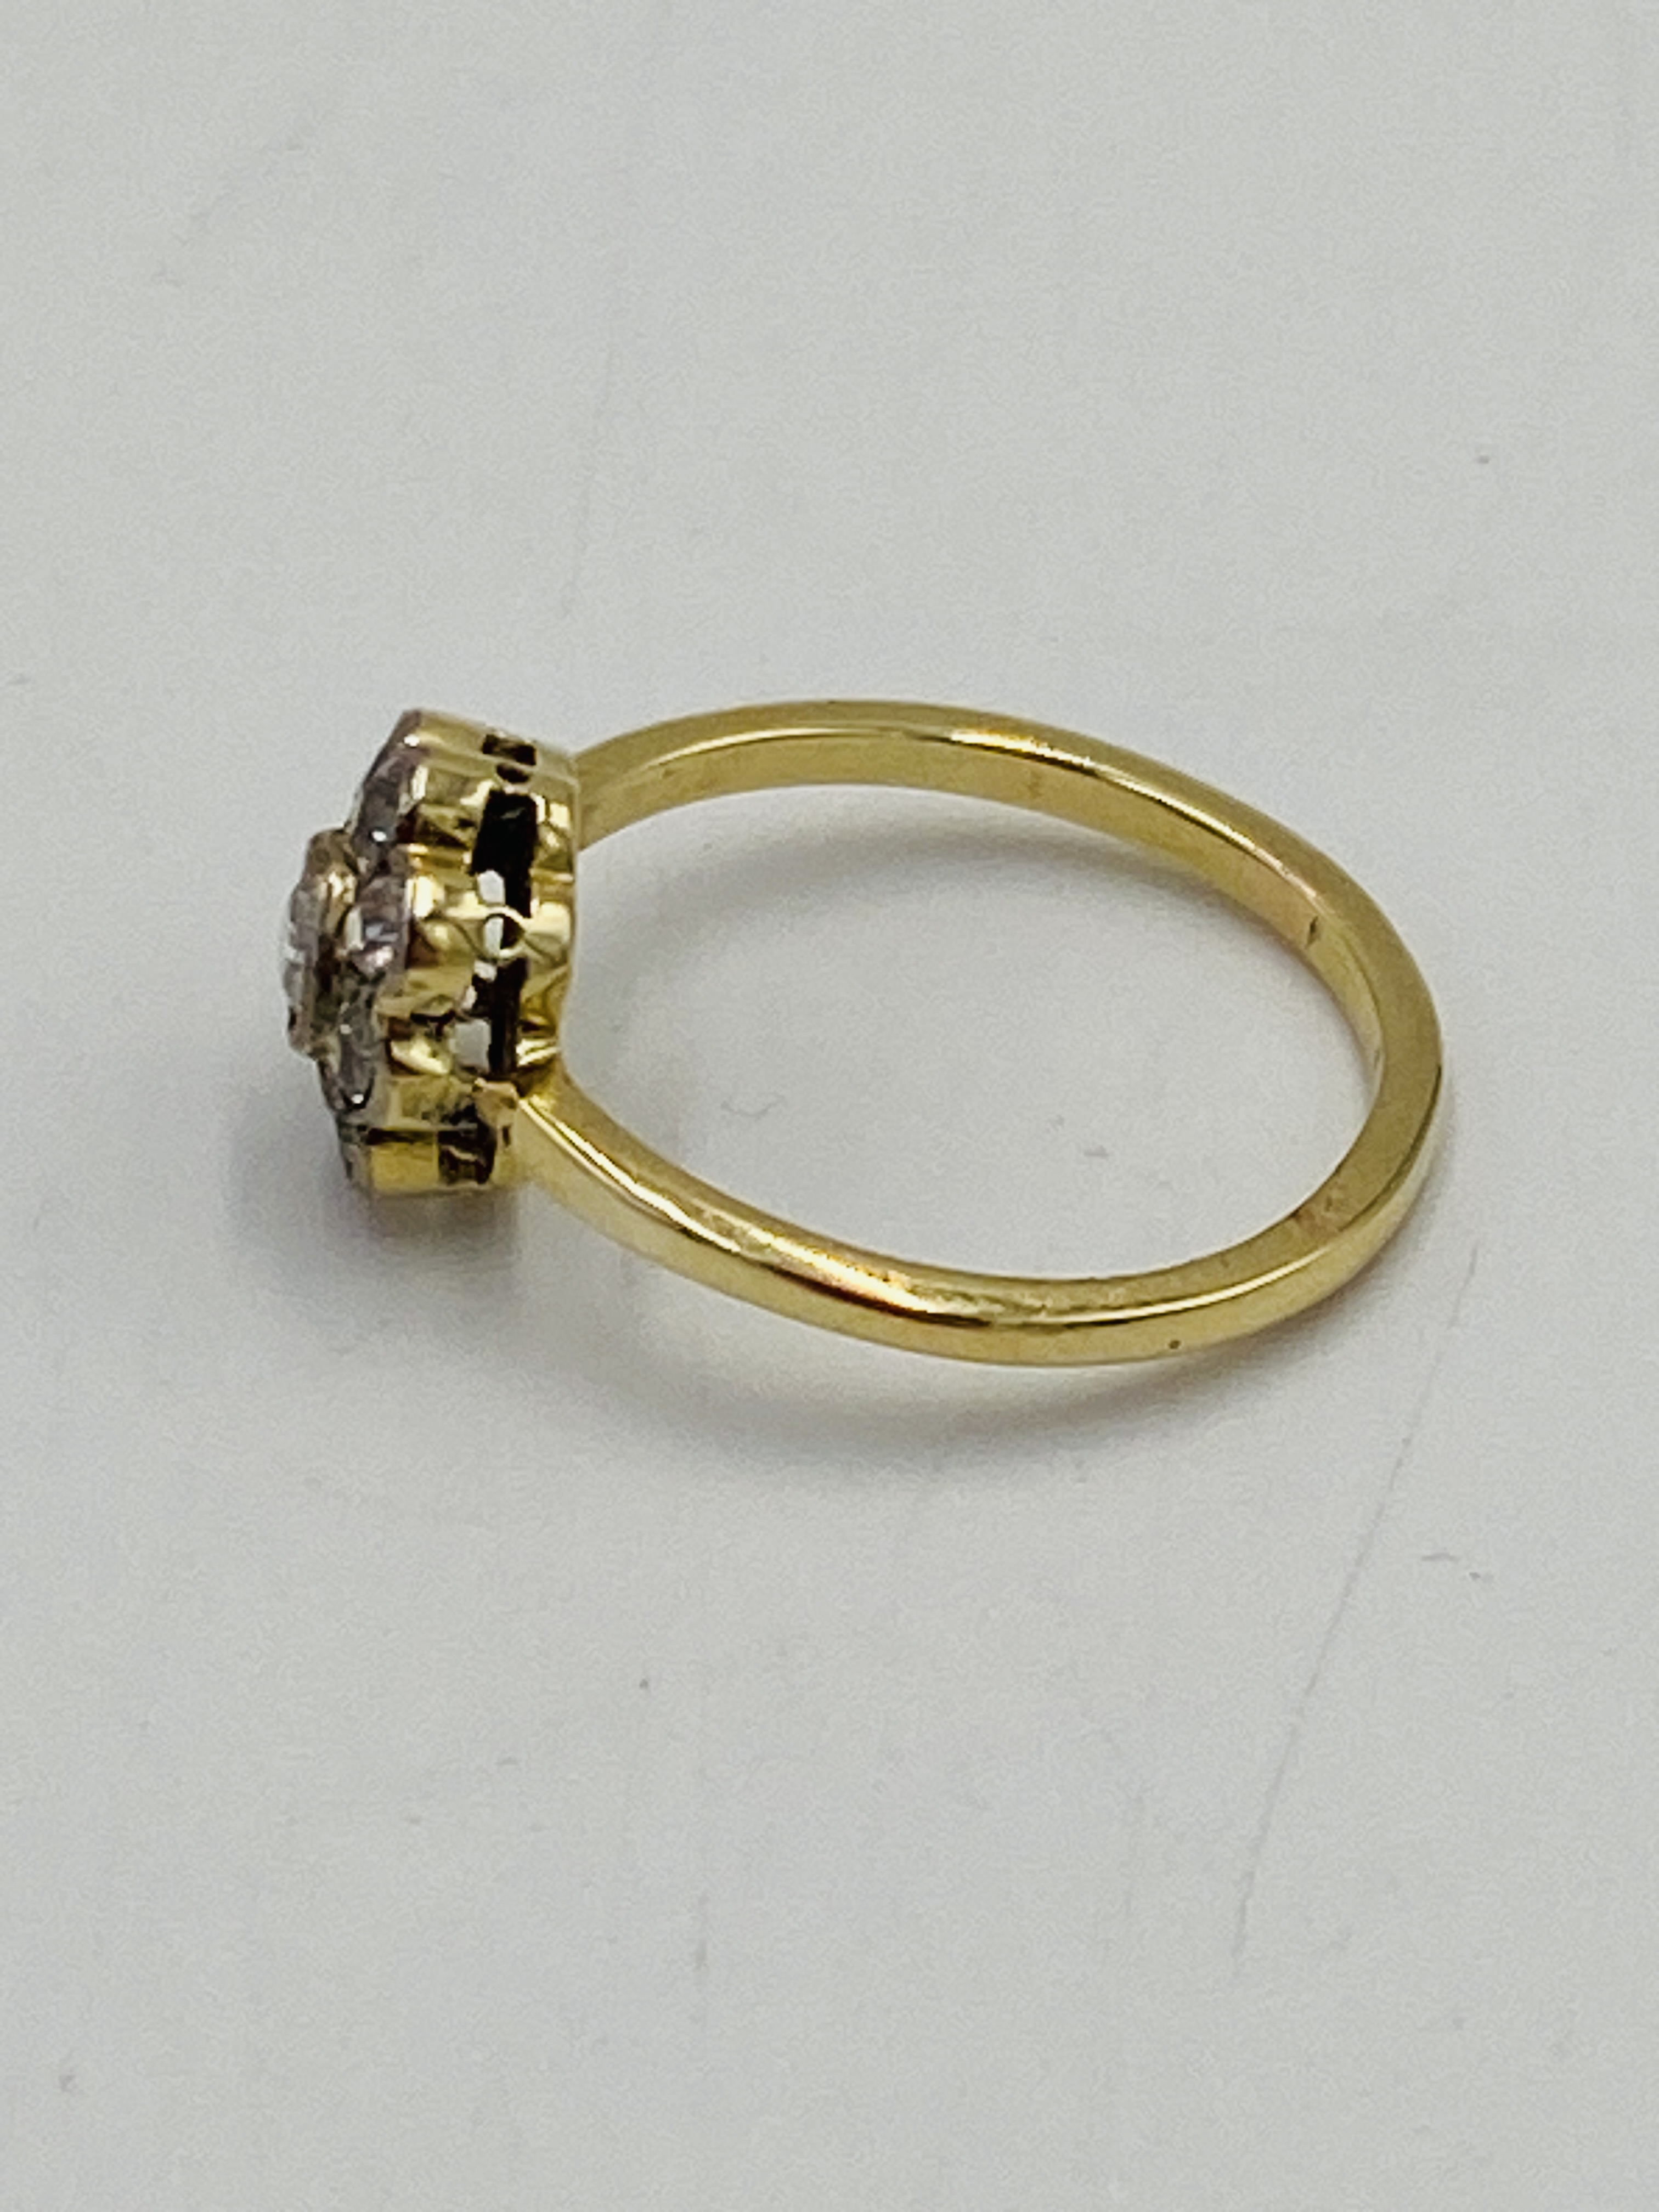 Gold and diamond 'daisy' ring - Image 3 of 6